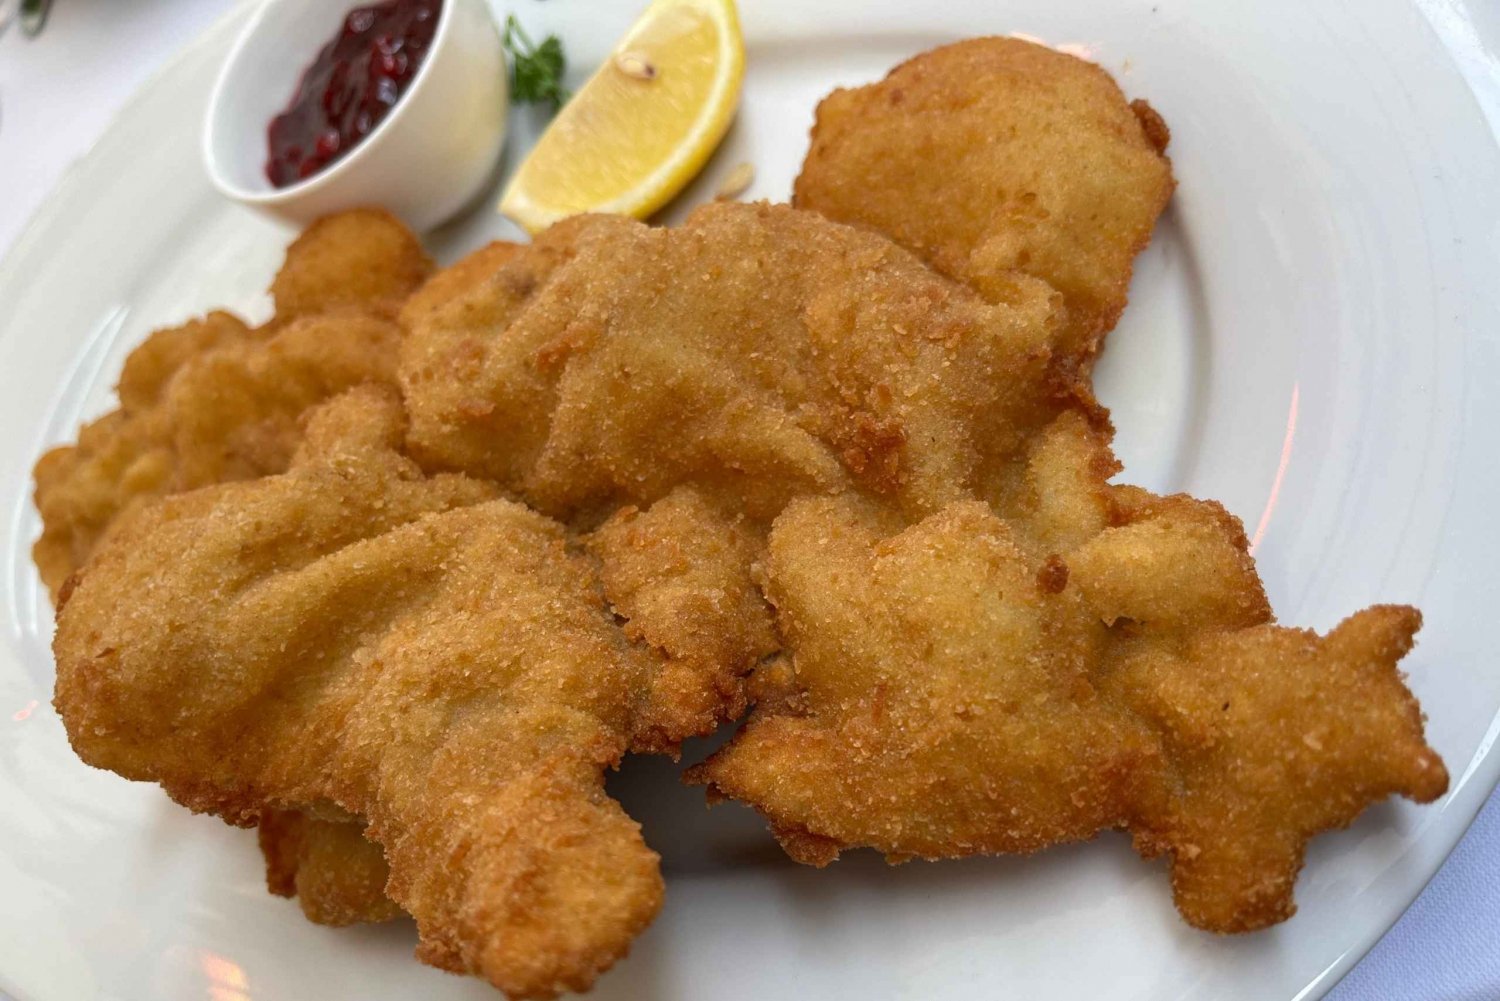 Experience the famous Wiener Schnitzel with all your senses